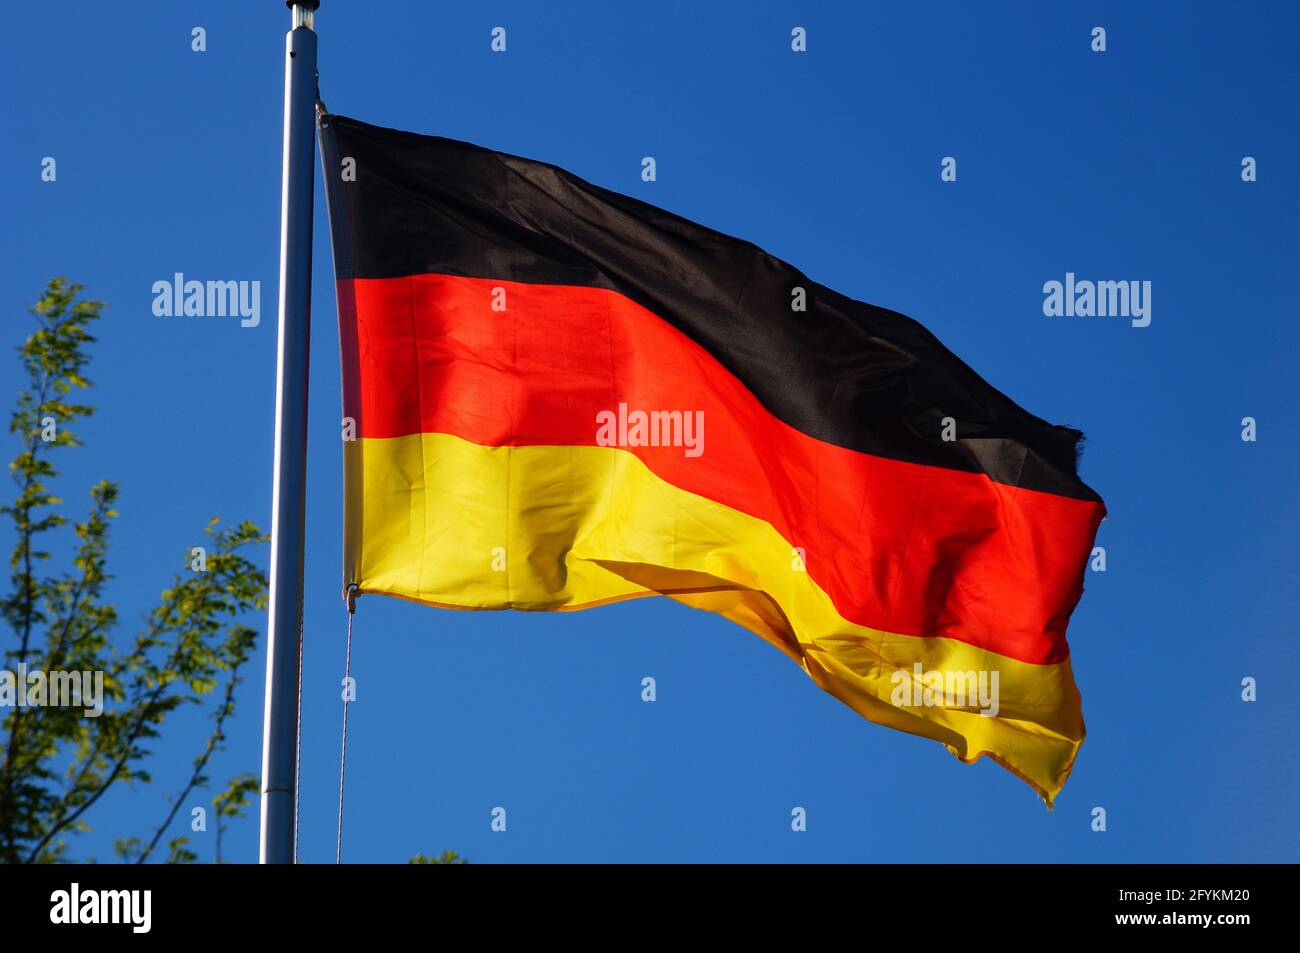 The German flag flies in the evening light. Stock Photo